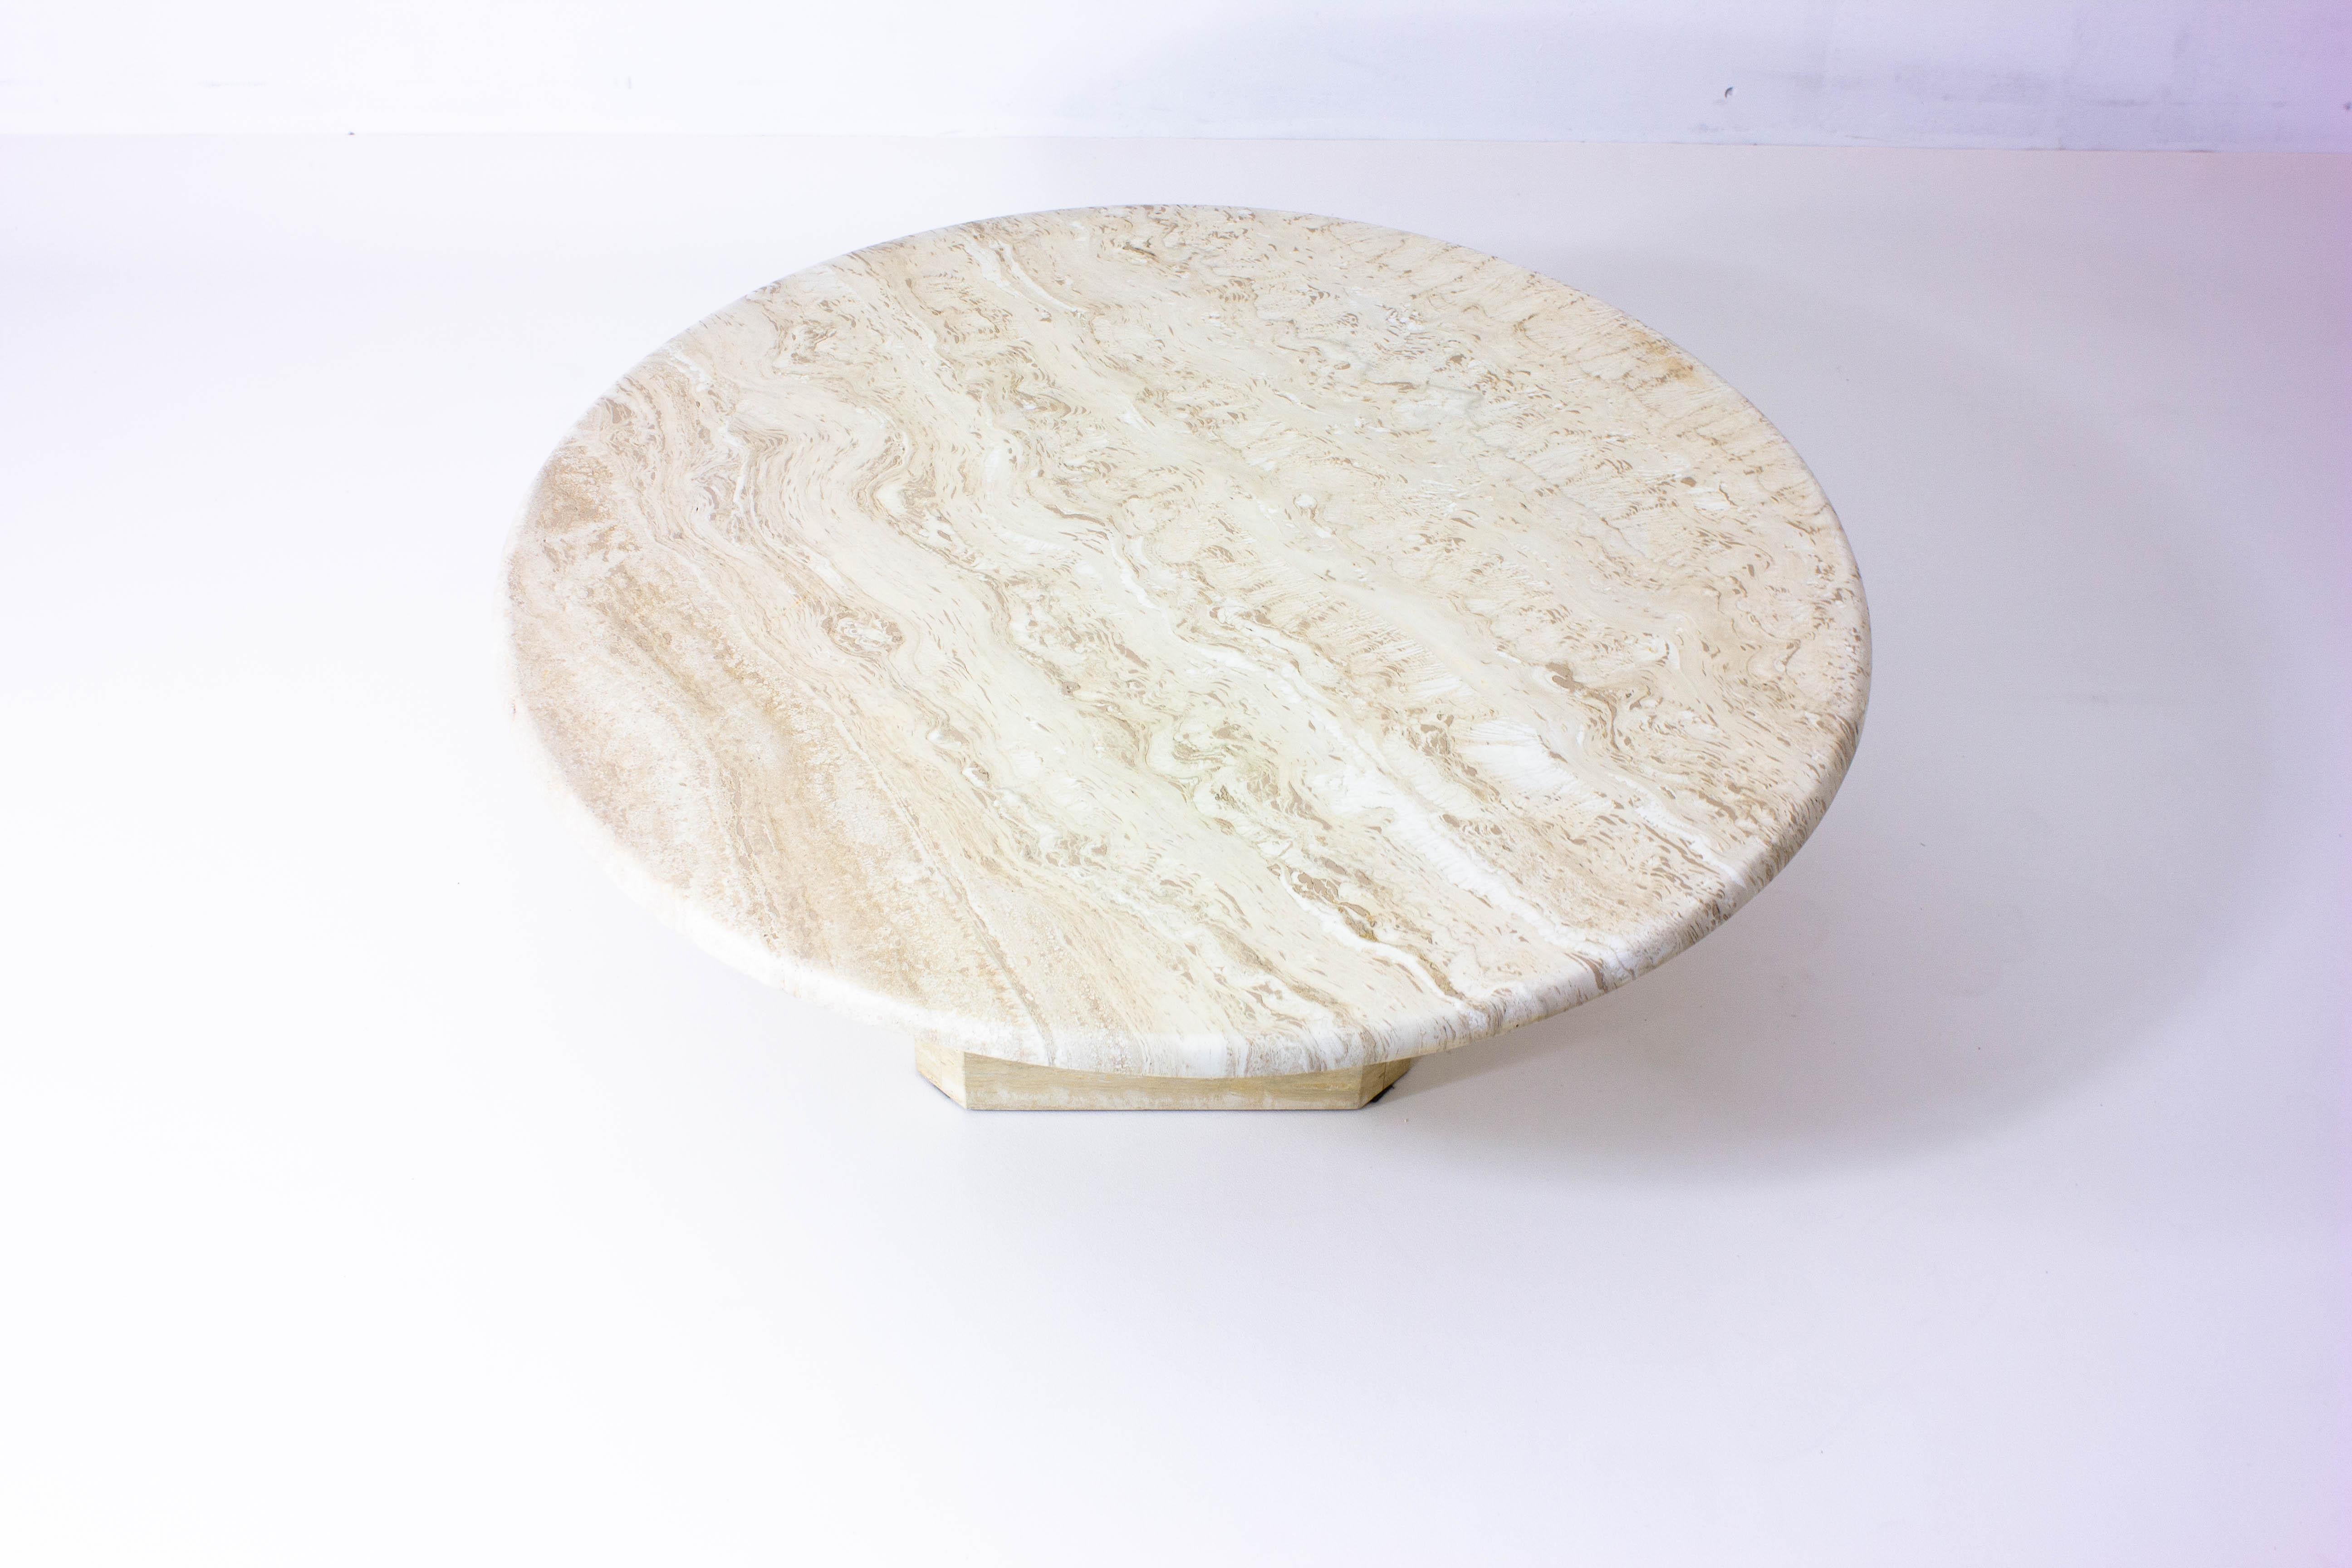 The rich, light color and wavy pattern of the stone complements many decors and goes great with a variety of interior design styles. This coffee table is sure to become a focal point in your home and will be a great addition to your living or dining